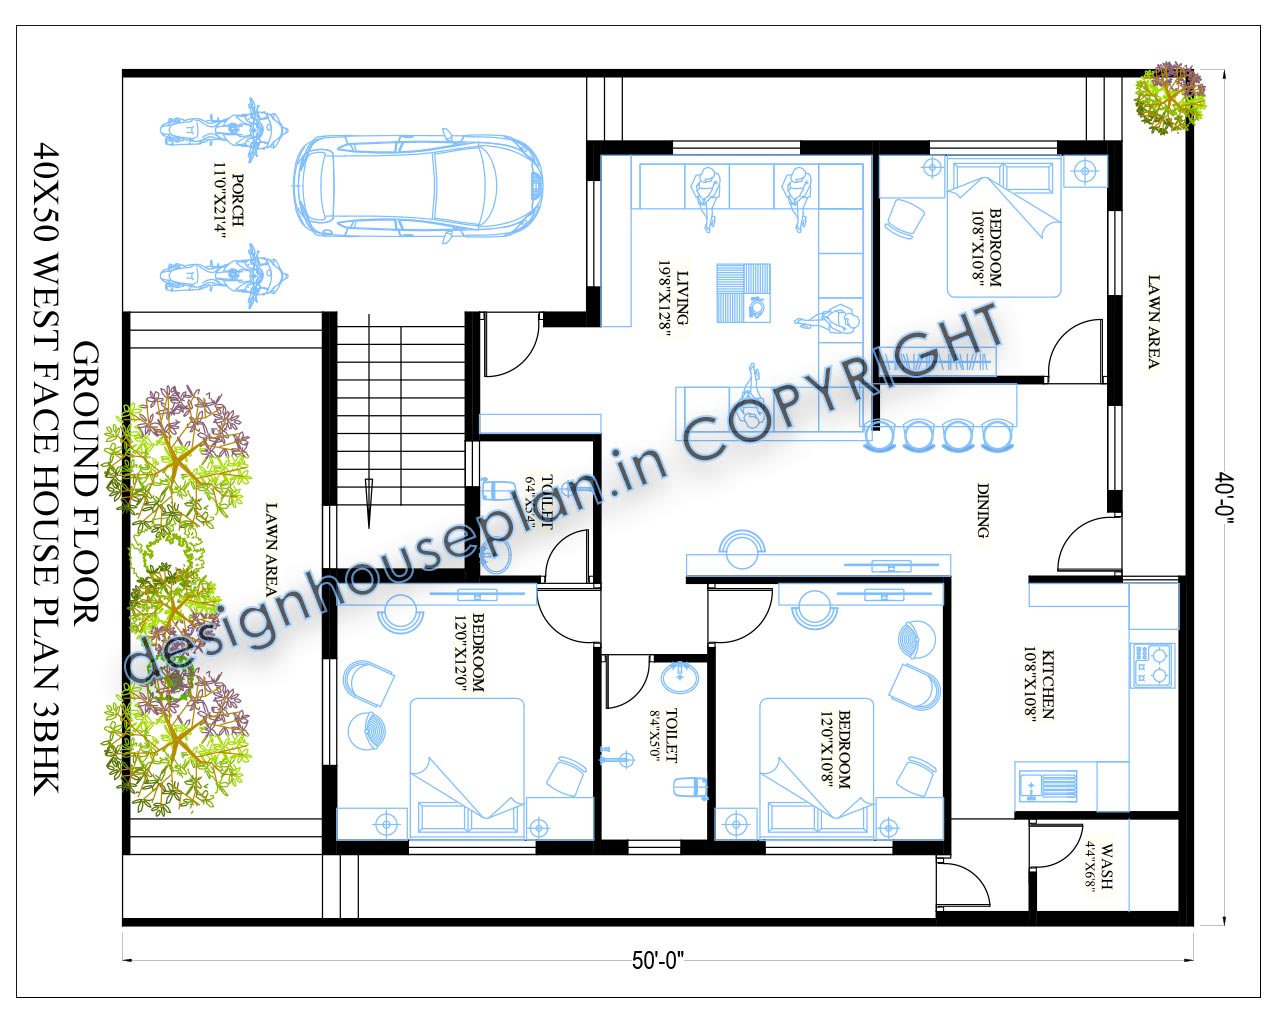 This is a 40x50 feet west-facing house design with 3 bedrooms and parking area.